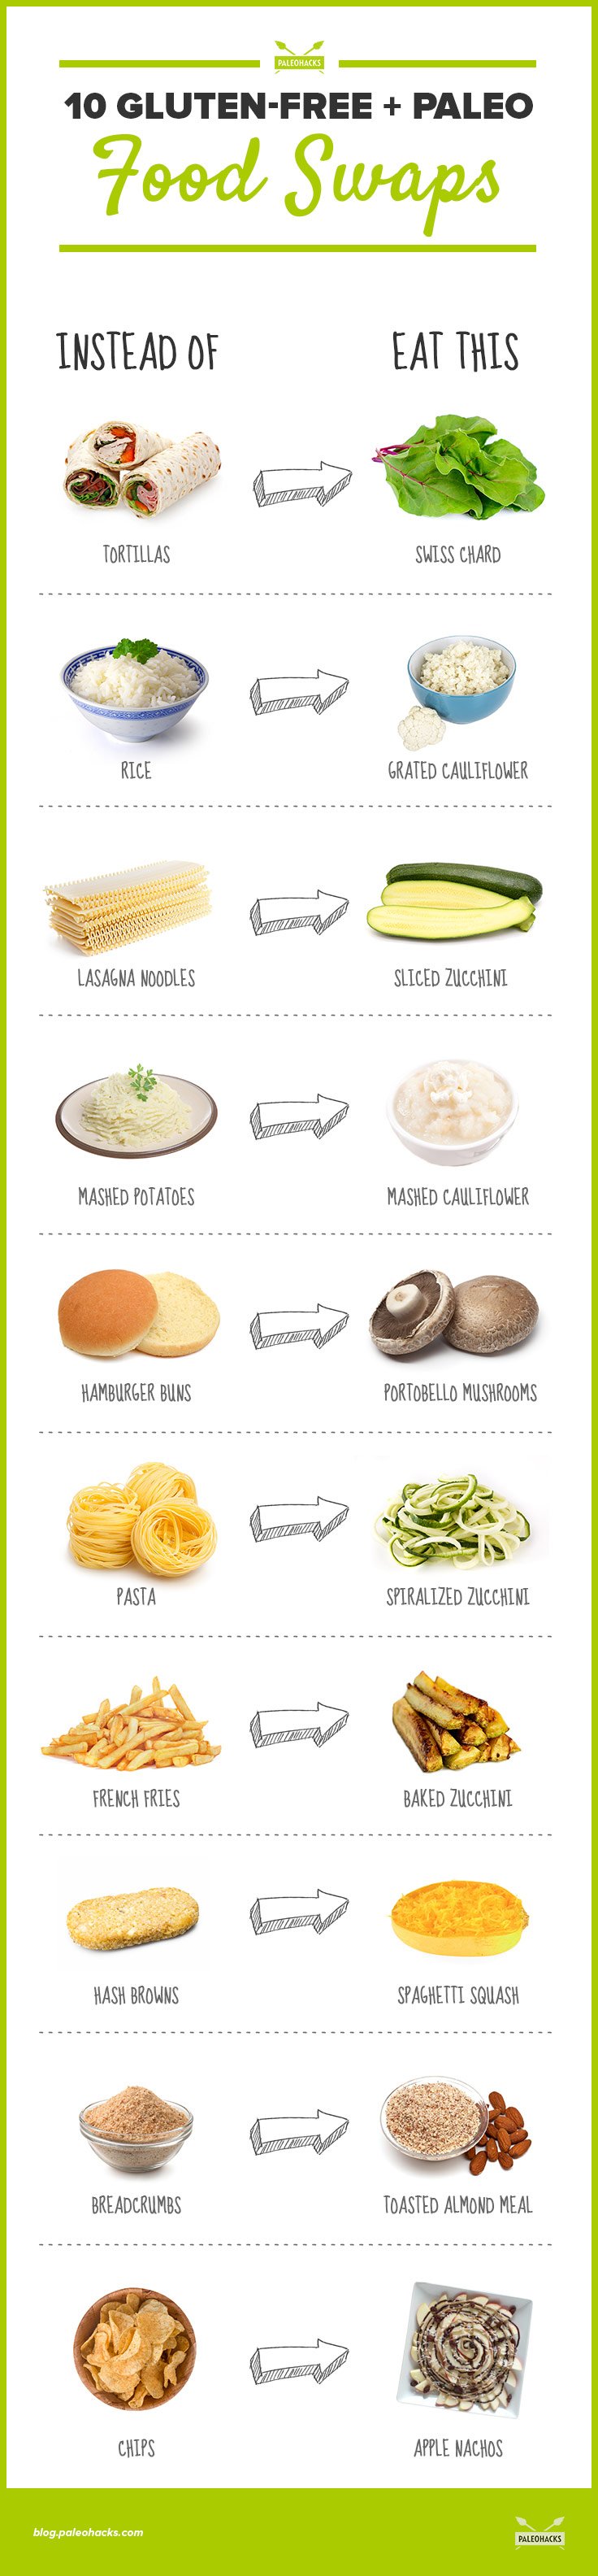 Gluten-free is all the rage, but sometimes these products are heavily processed. Make a few simple food swaps in favor of heathy veggies.